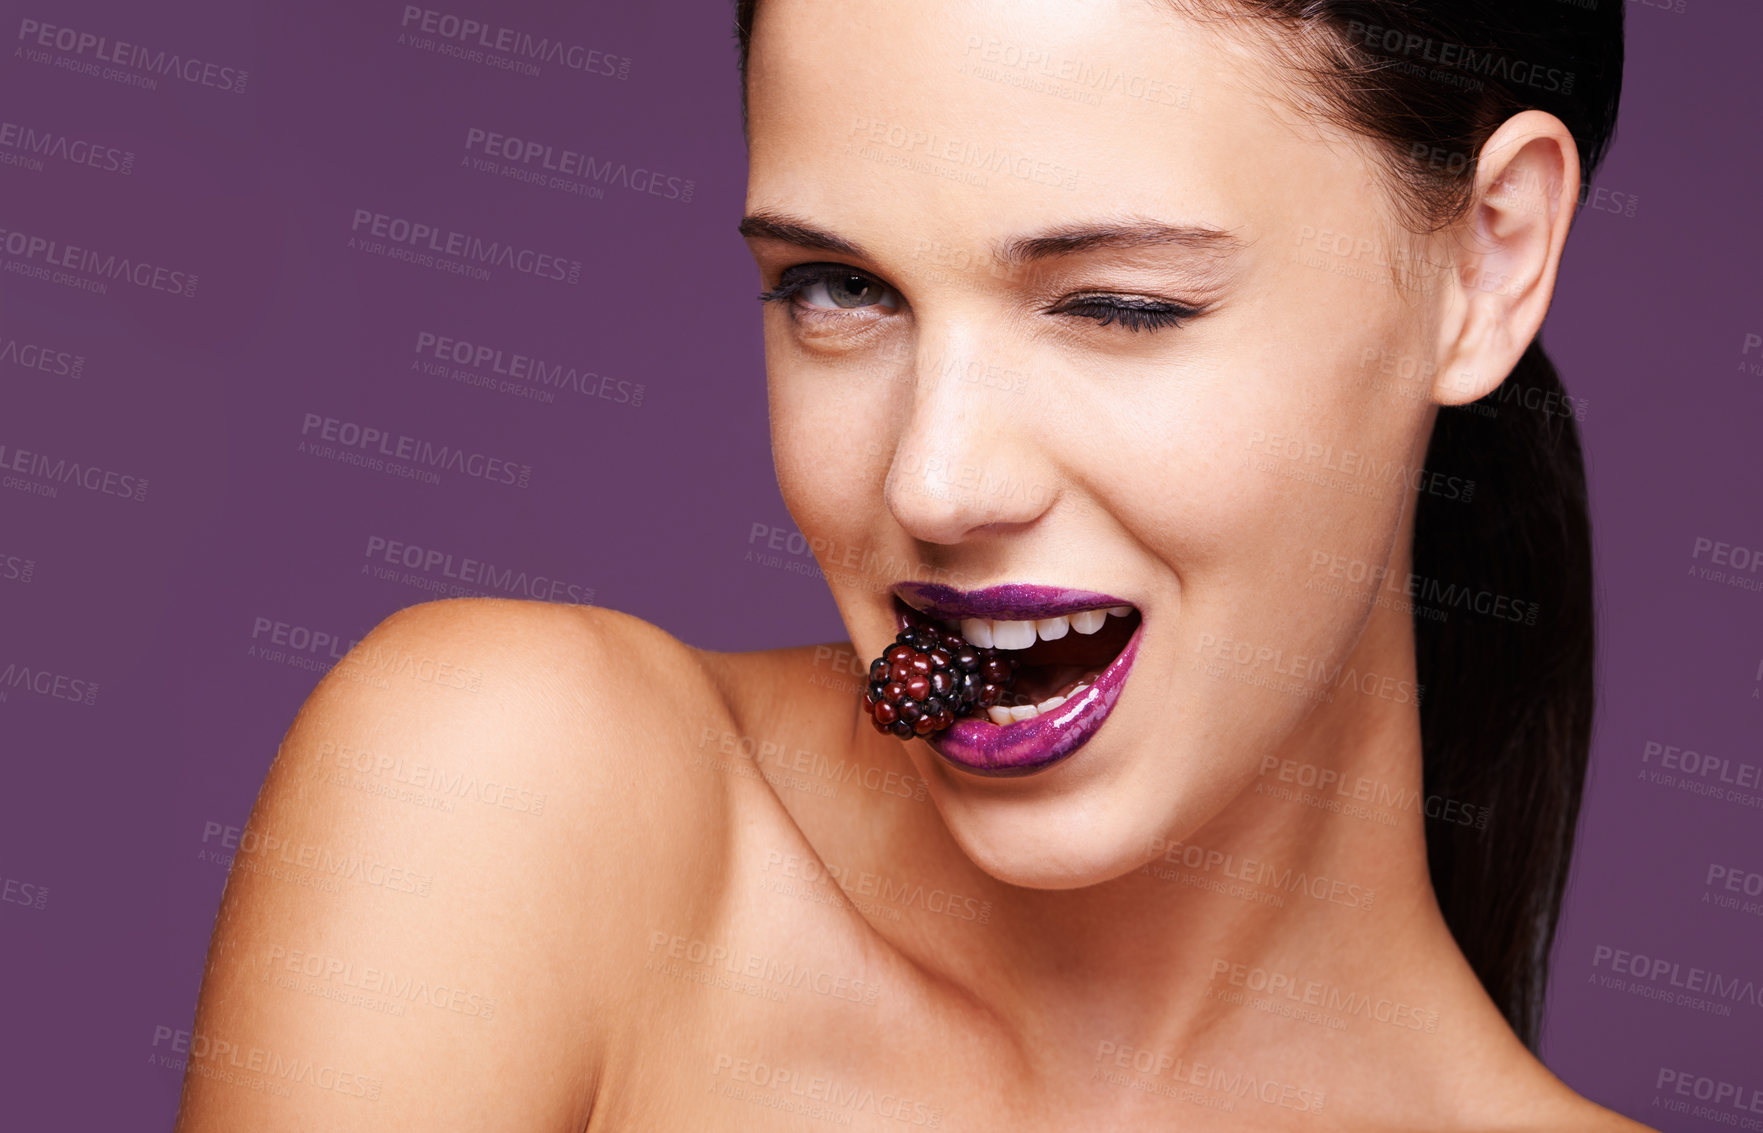 Buy stock photo A studio portrait of a beautiful young woman wearing purple lipstick and biting into a berry